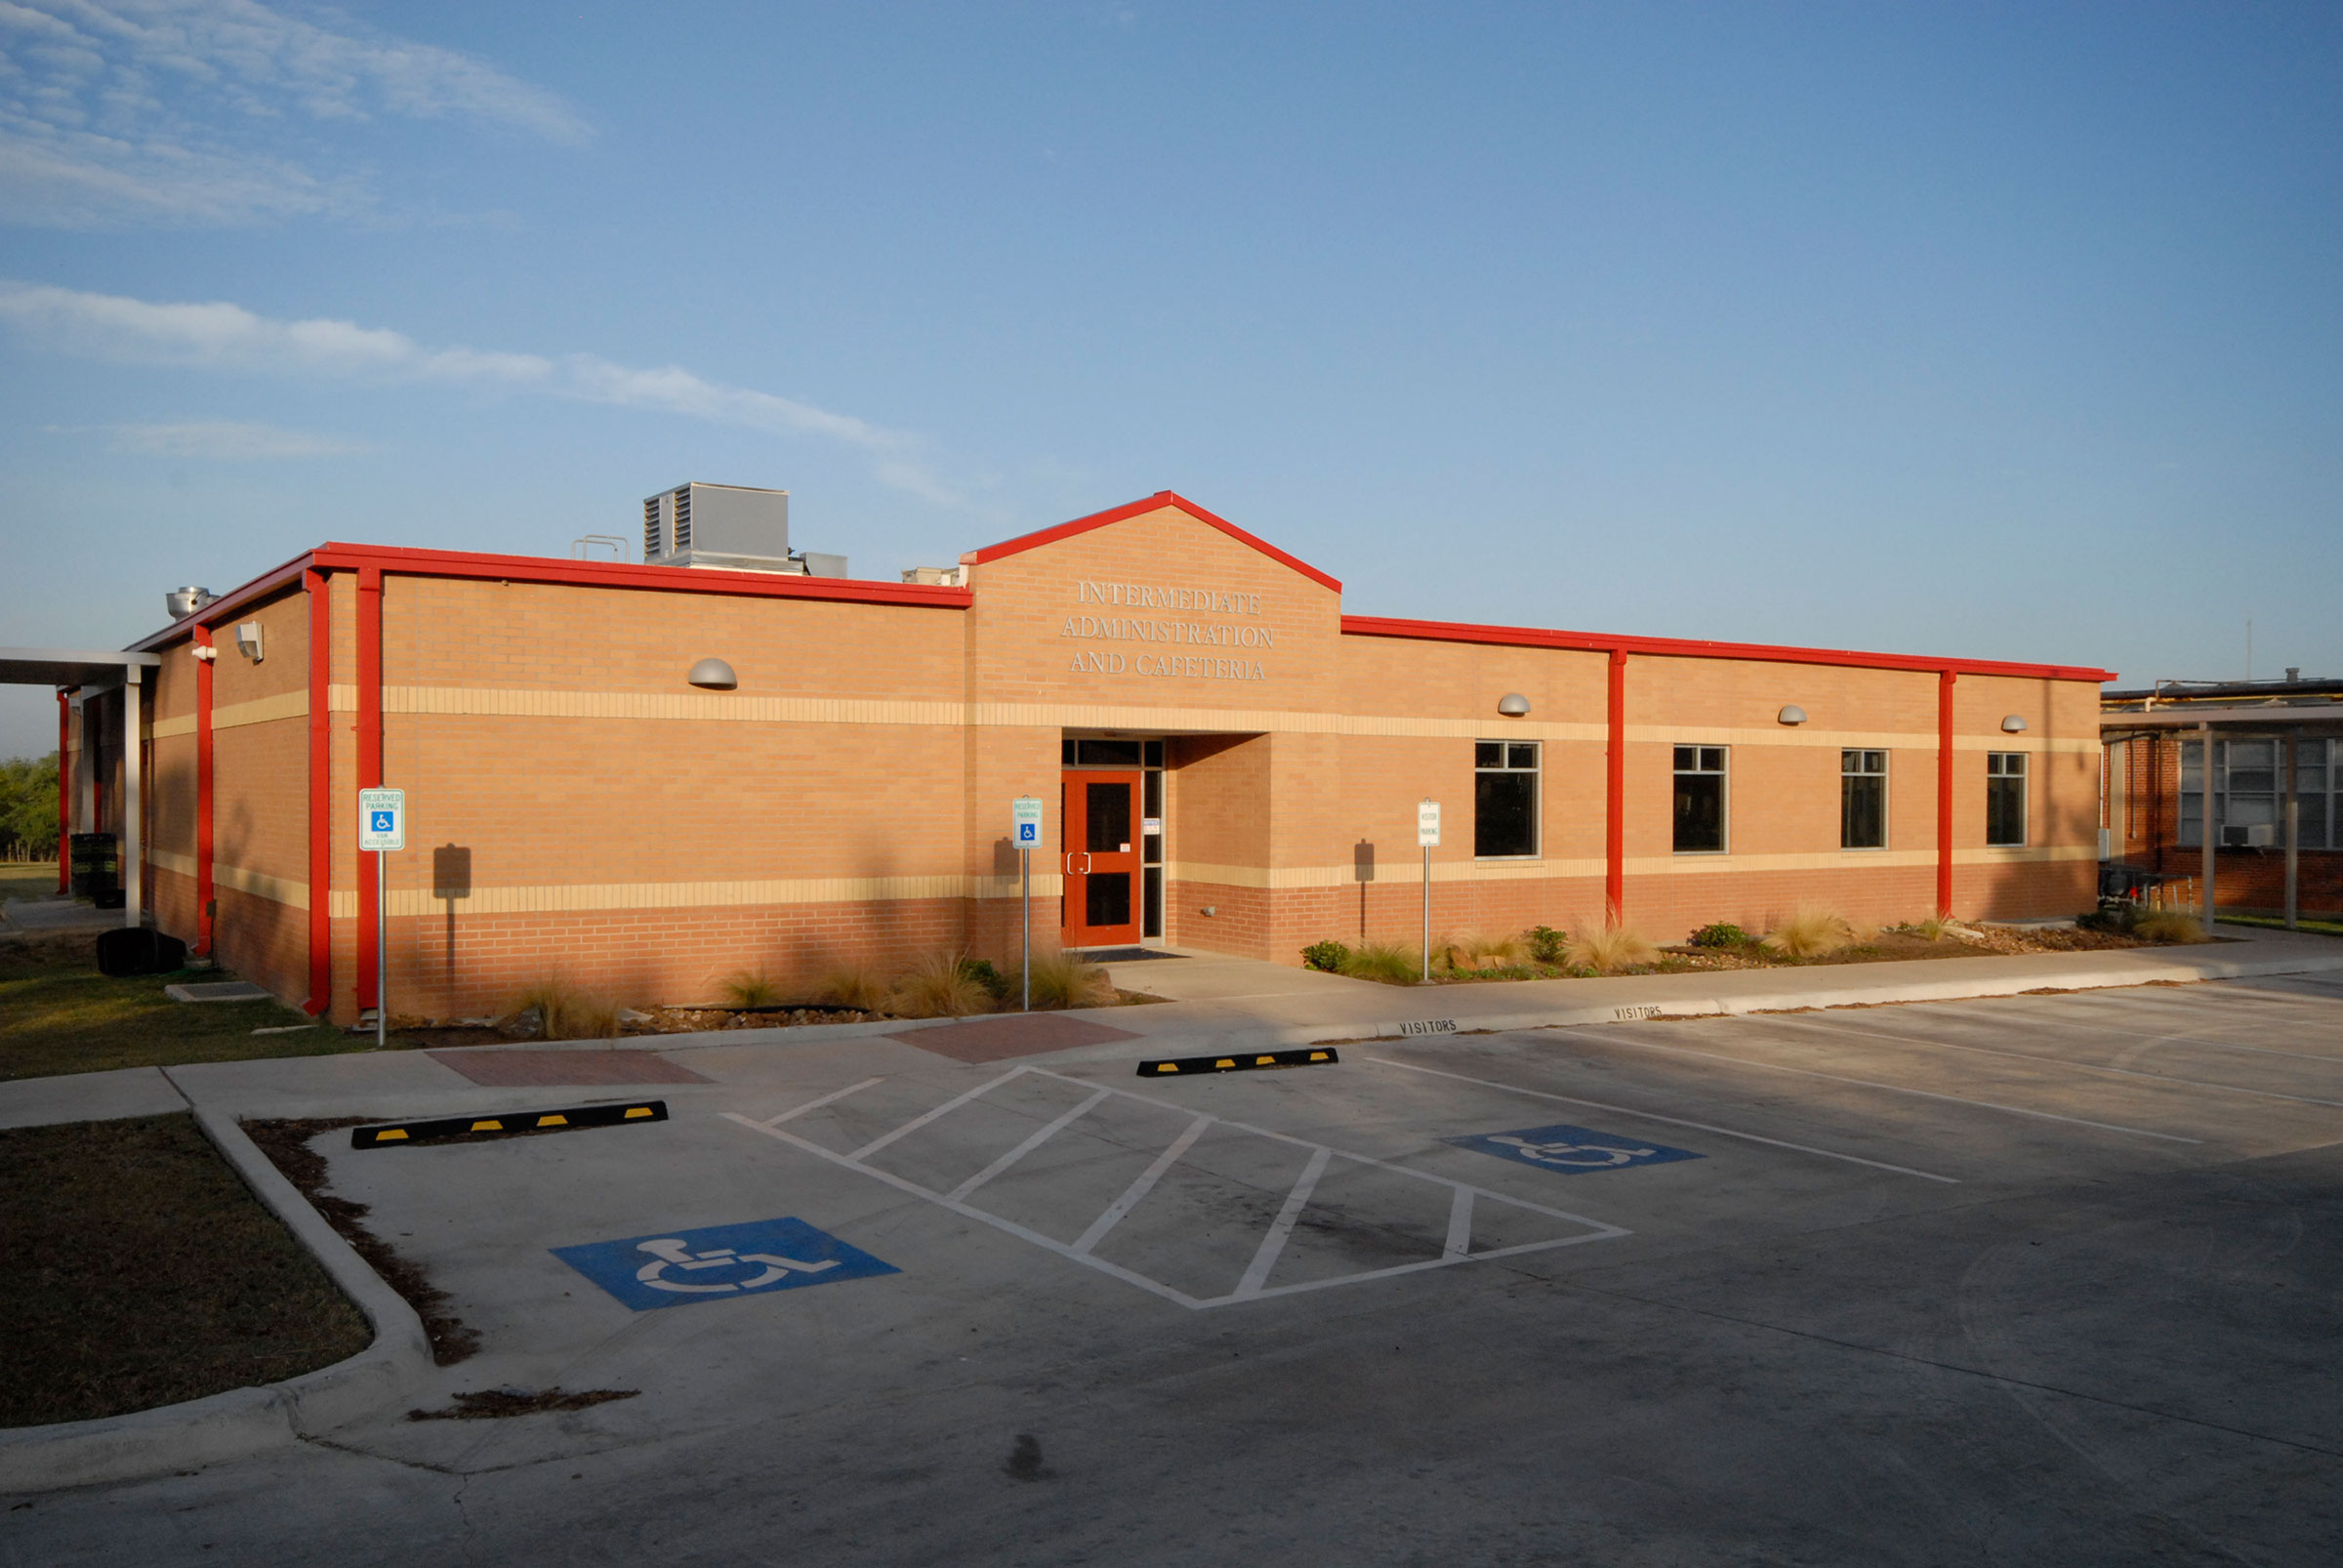 Intermediate School Administration and Cafeteria